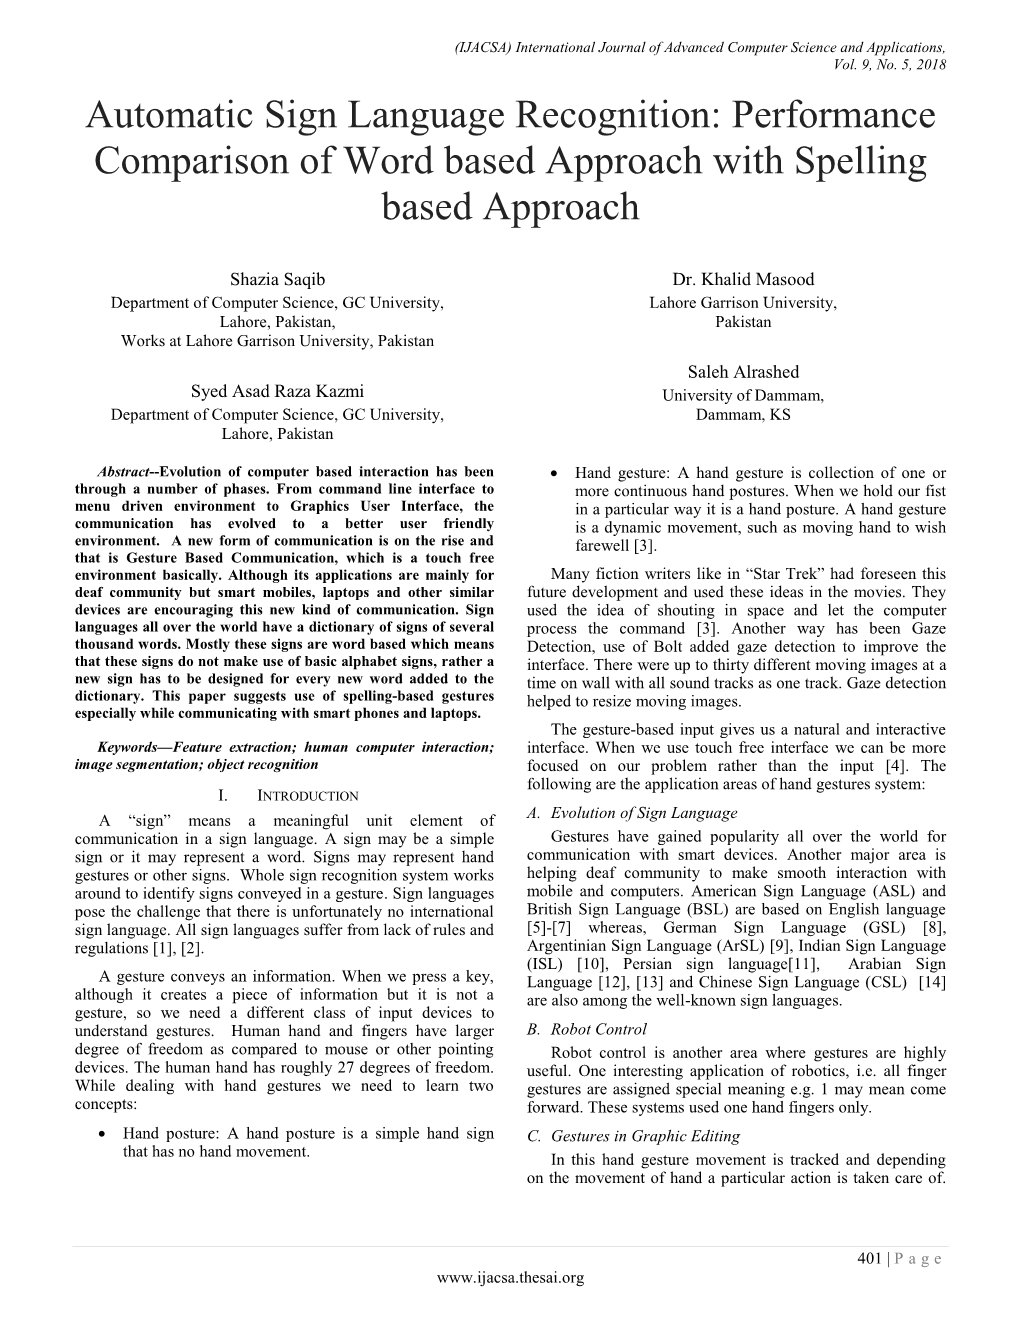 Automatic Sign Language Recognition: Performance Comparison of Word Based Approach with Spelling Based Approach